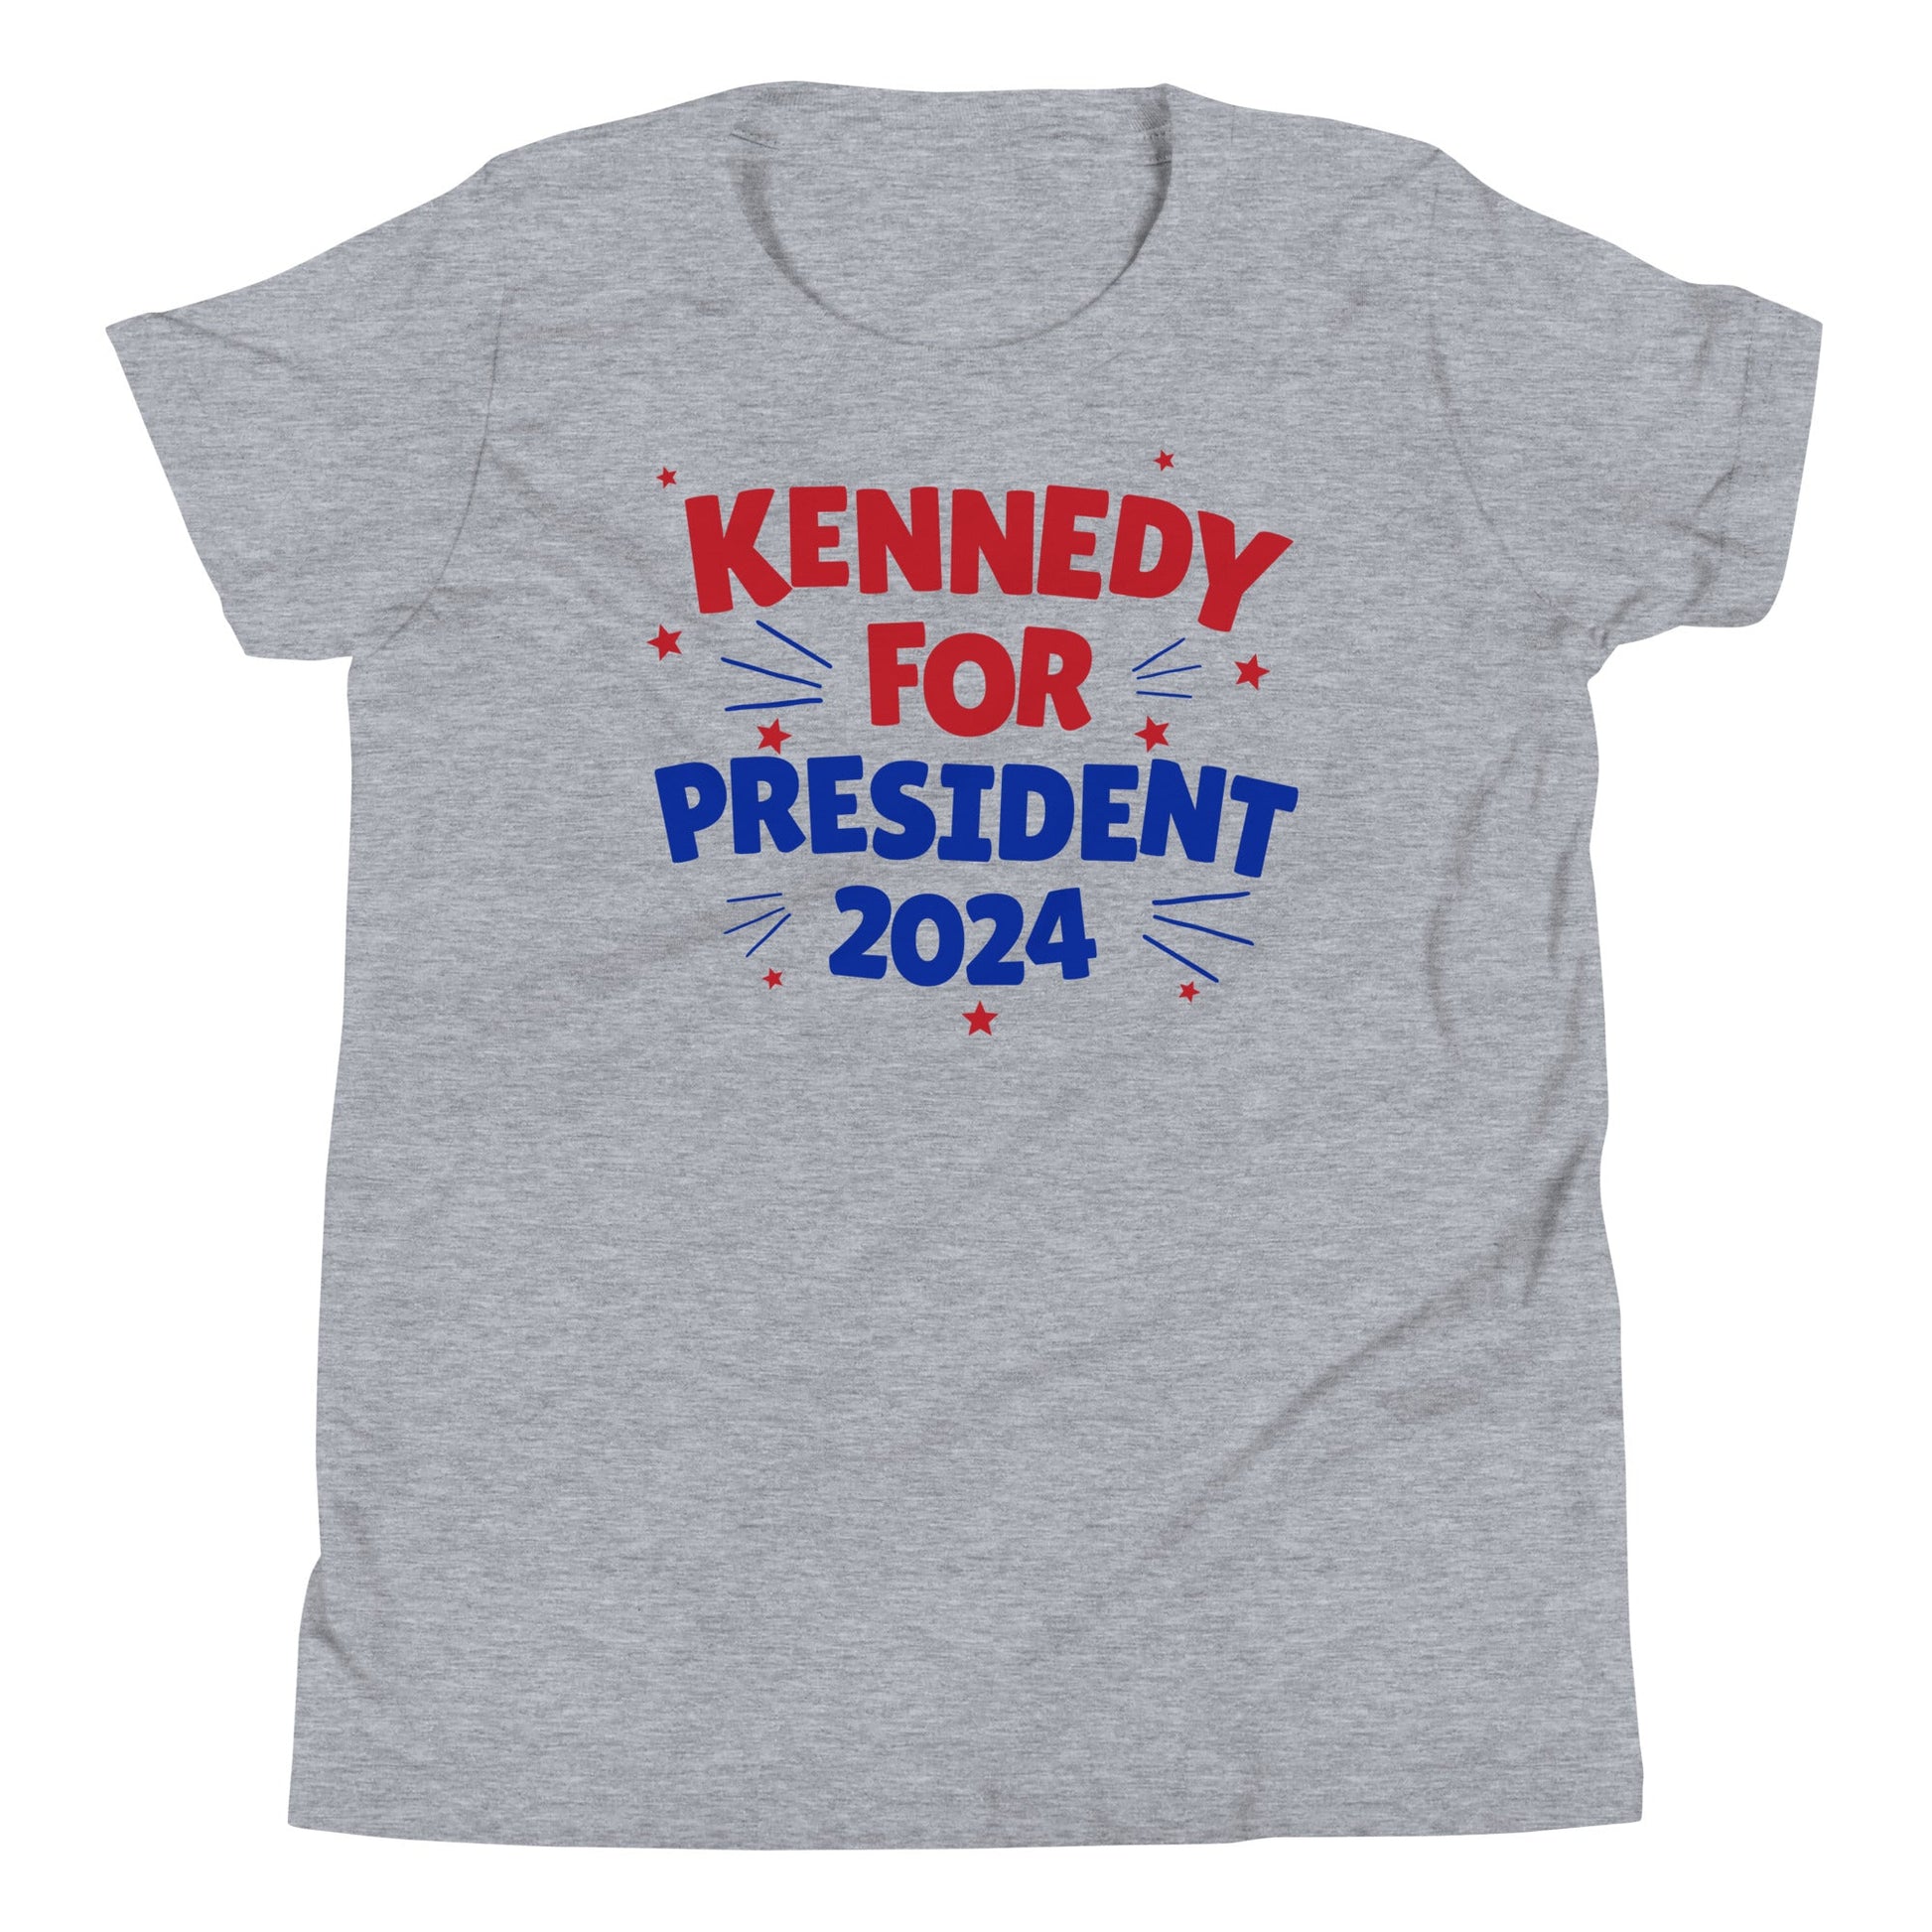 Kennedy for President Youth Tee - TEAM KENNEDY. All rights reserved